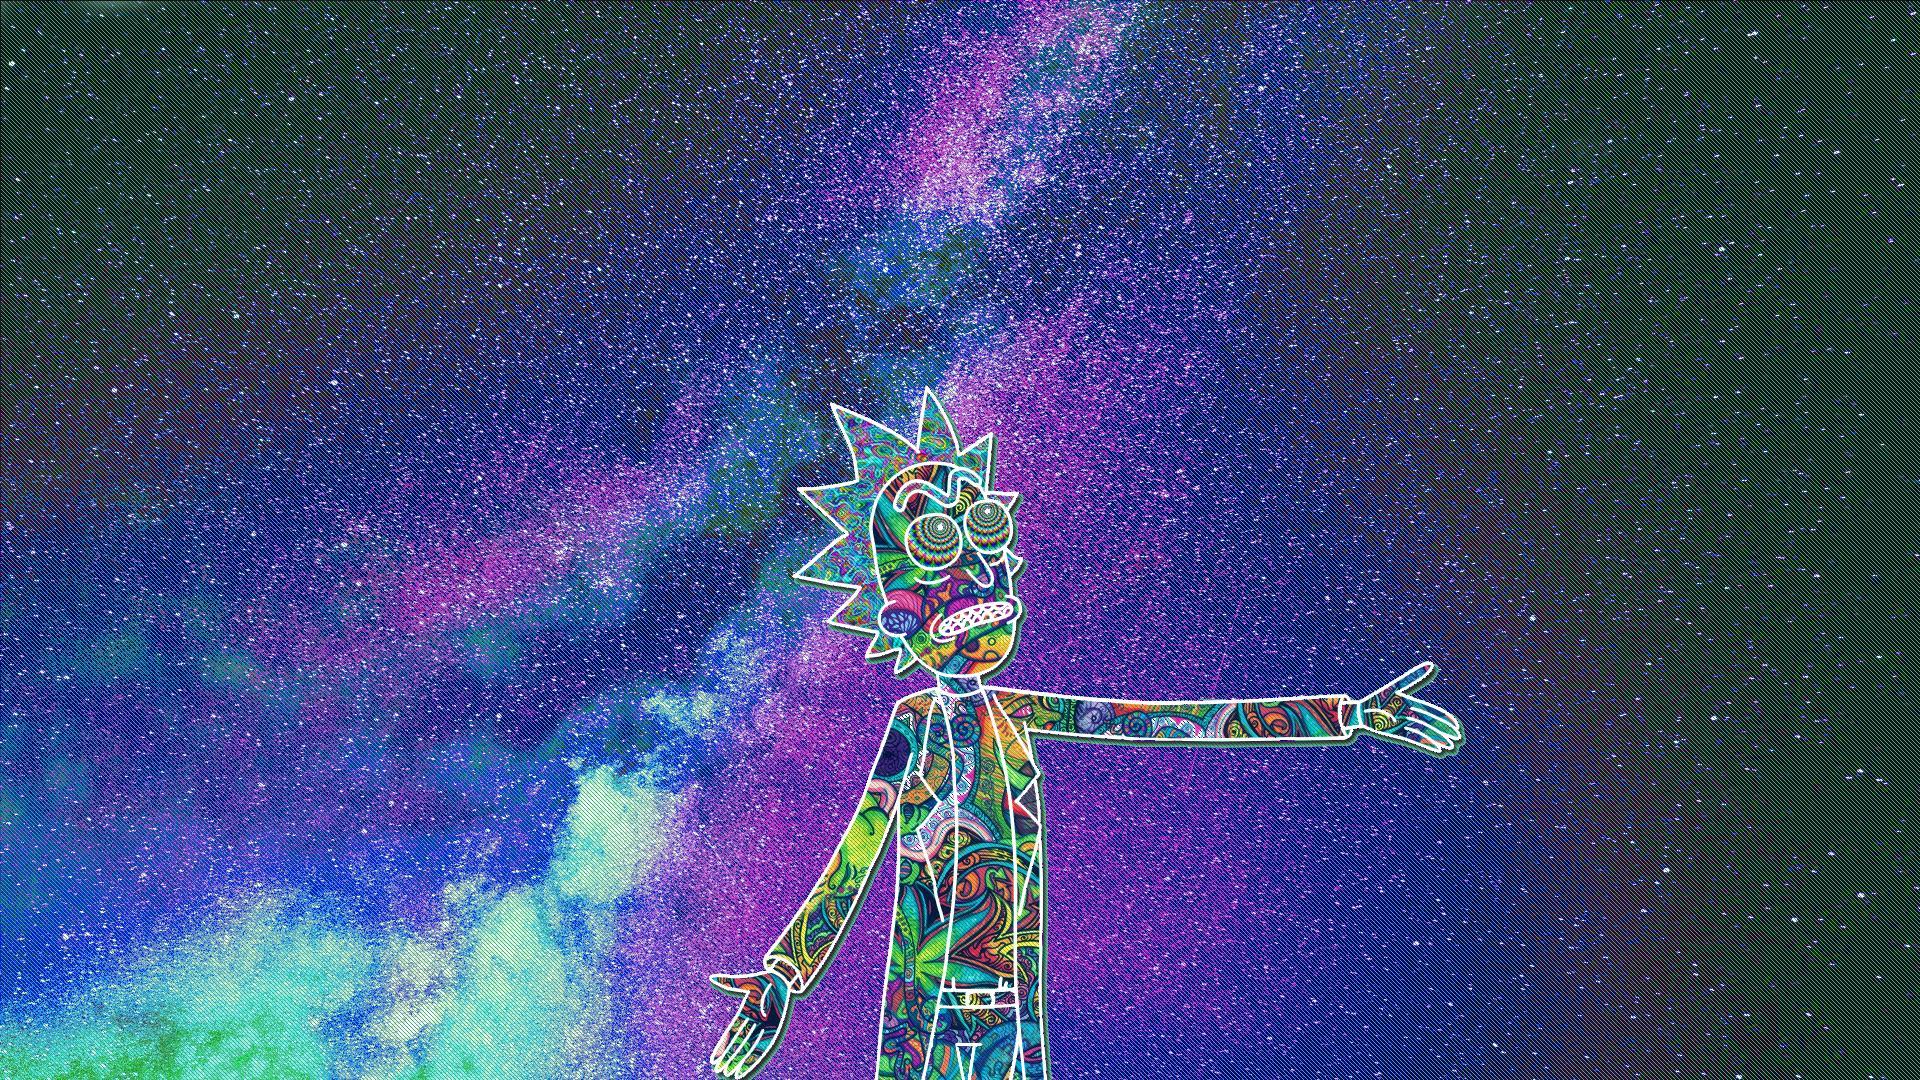 I edited this trippy Rick wallpaper for myself, figured some of you